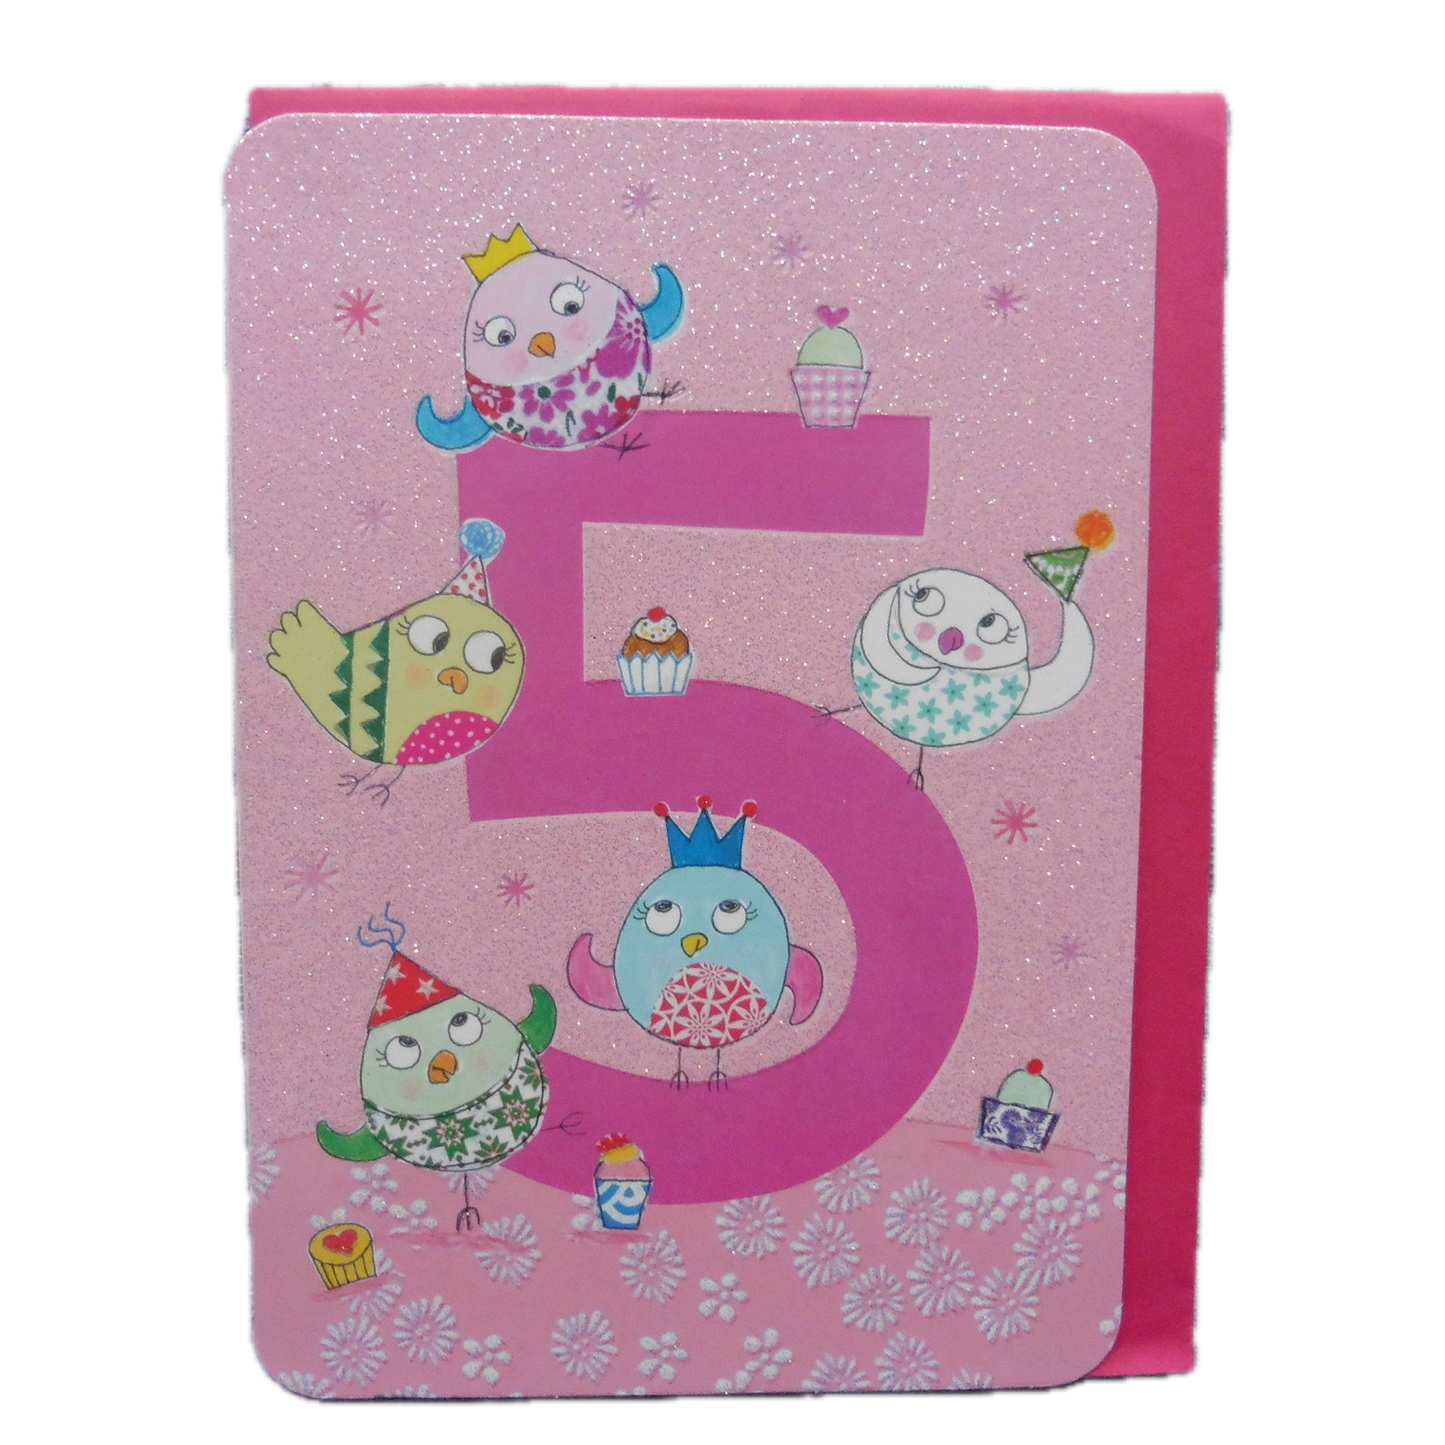 Age 5 card with birds